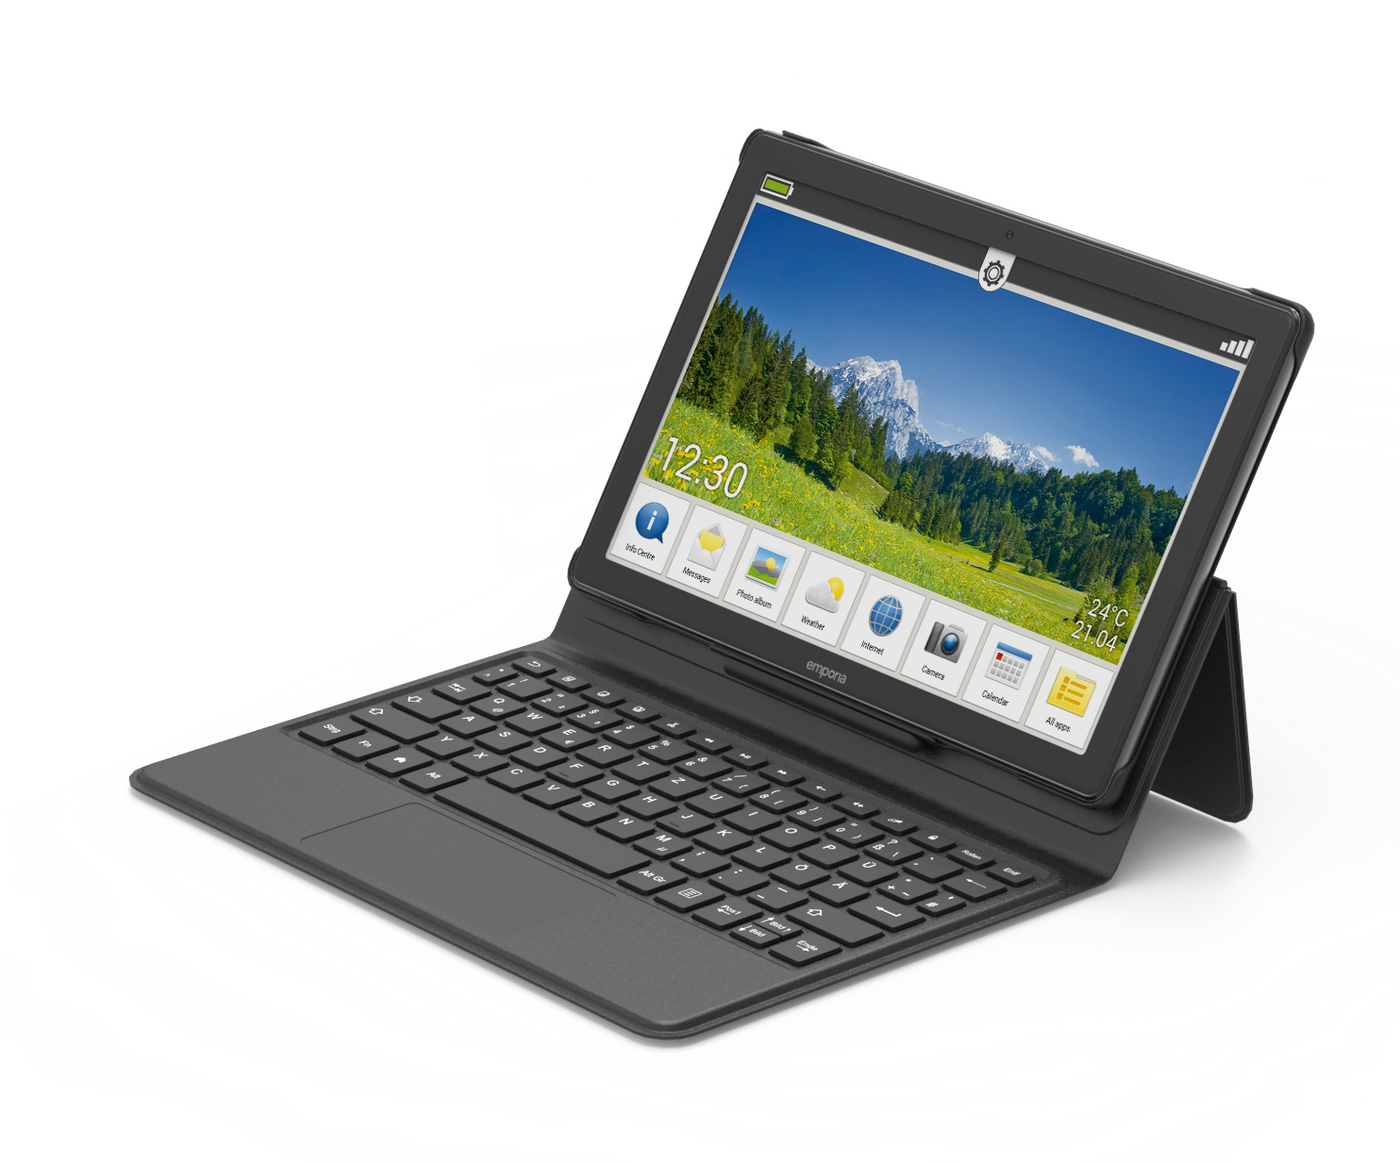 emporiaTABLET with a FREE months mobile data and FREE keyboard